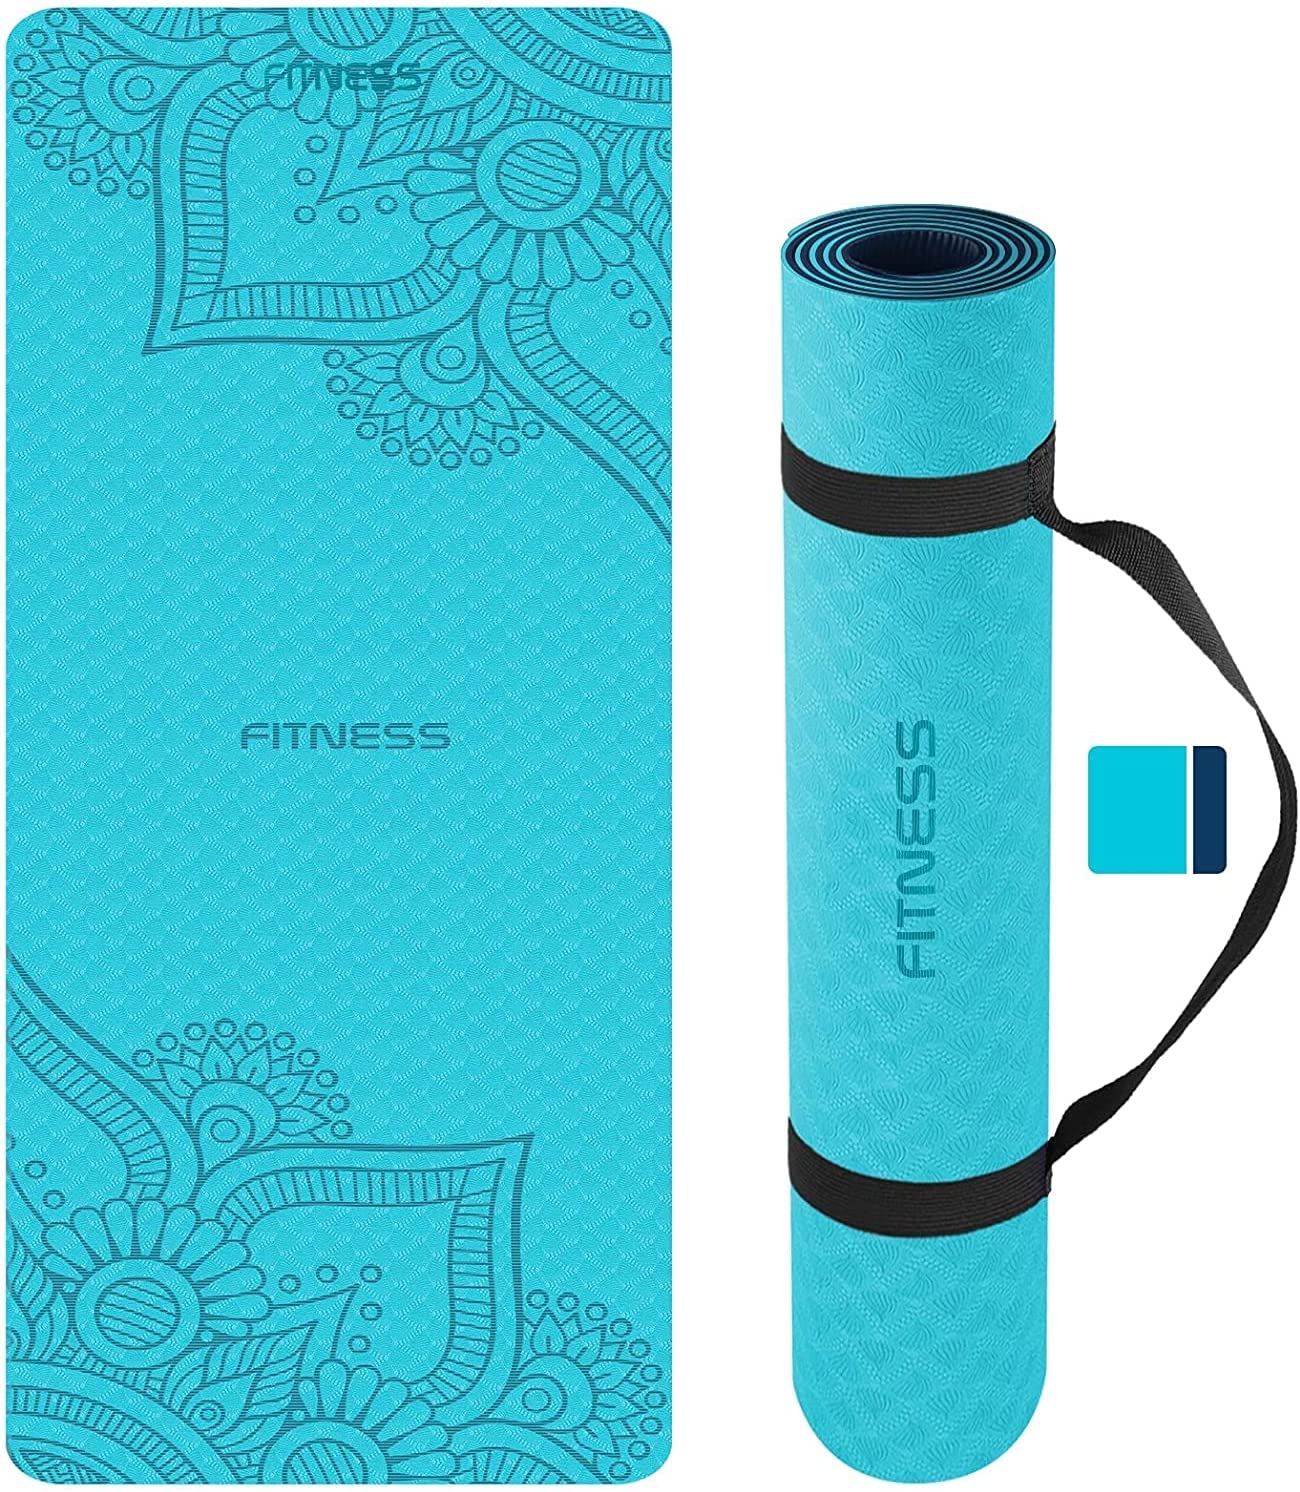 Yoga Mat Non Slip, Pilates Fitness Mats with Alignment Marks, Eco Friendly, Anti-Tear Yoga Mats for Women, Exercise Mats for Home Workout with Carrying Strap